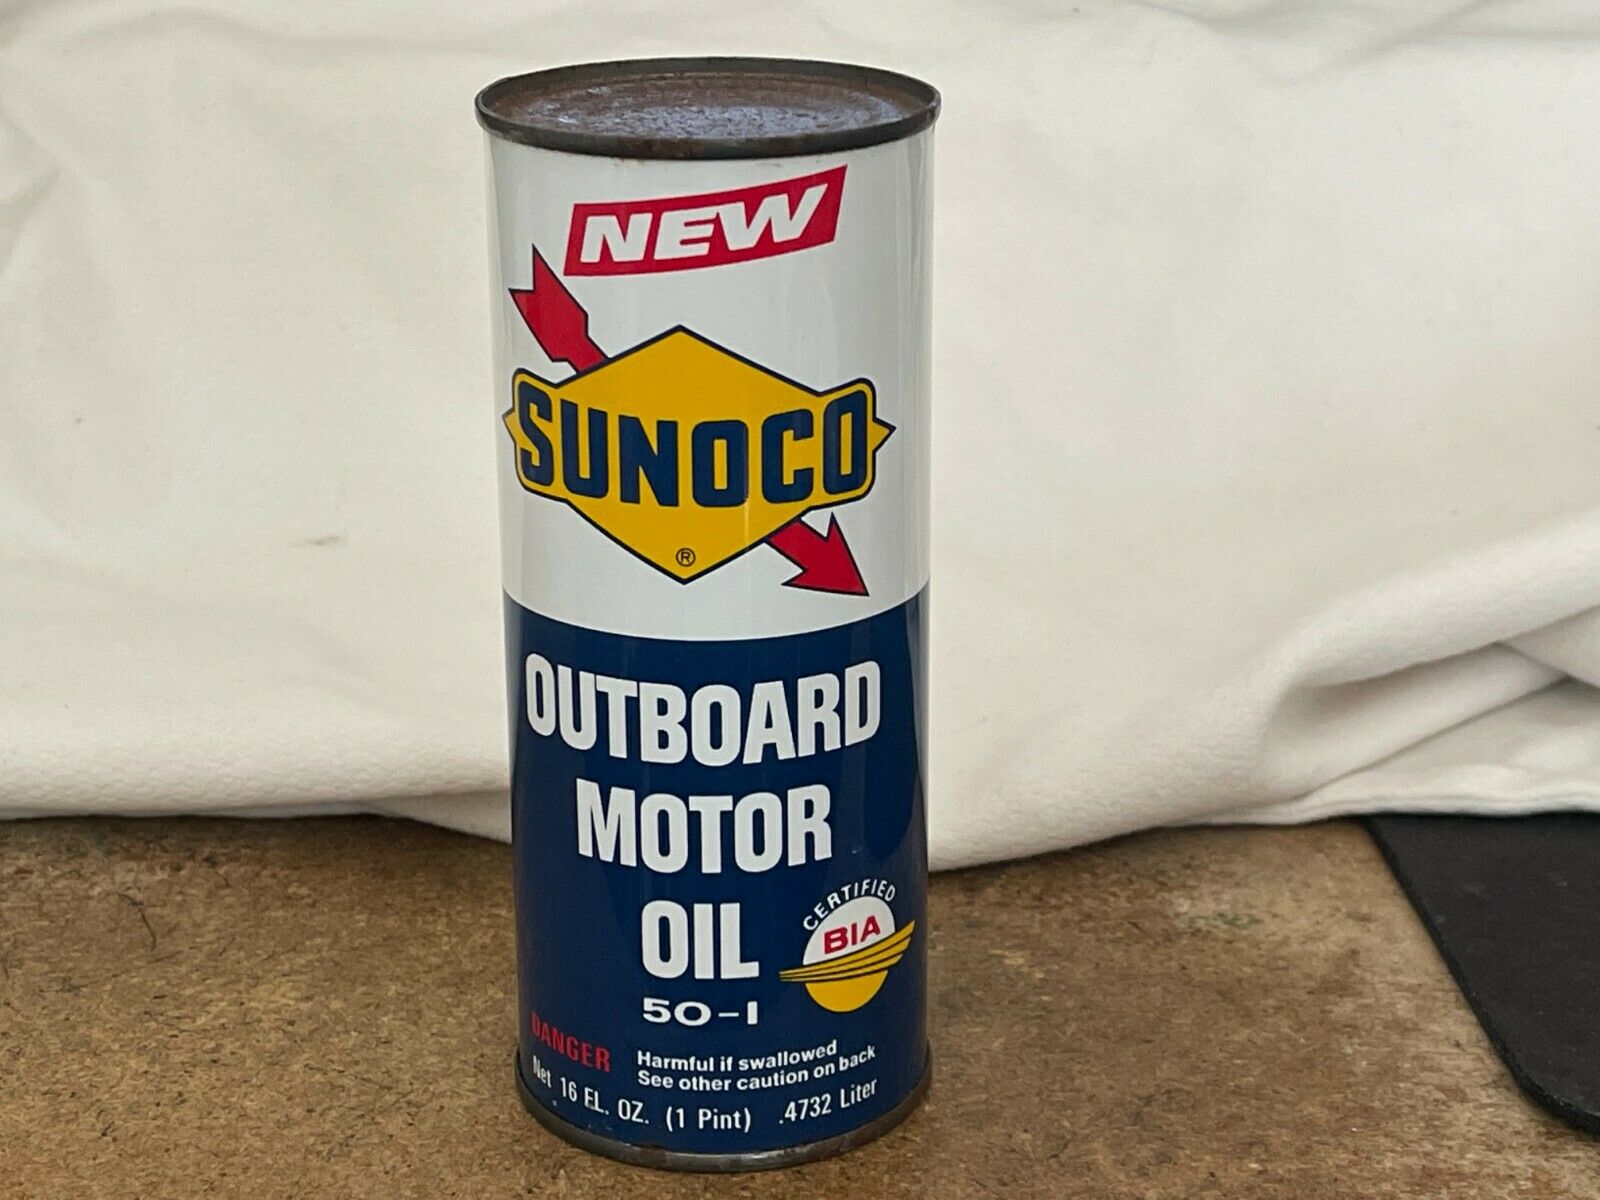 Sunoco Outboard Motor Oil Pint New Certified Bia Can Tin Full